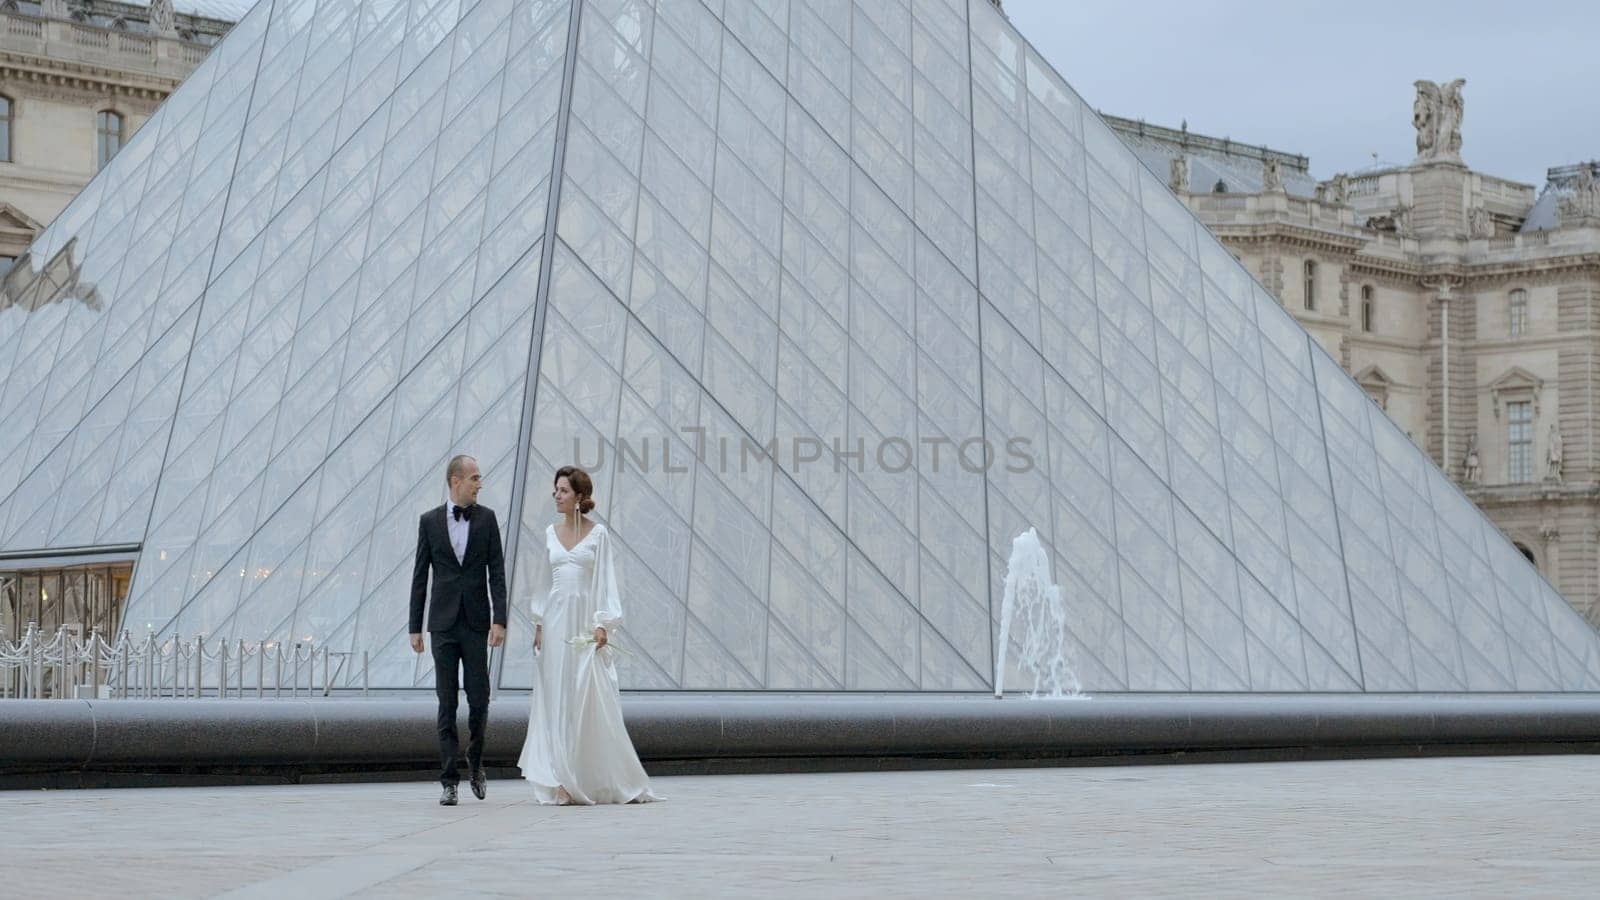 Wedding couple walking on the background of the Louvre pyramid, France, Paris. Action. Romantic wedding shooting near museum. by Mediawhalestock